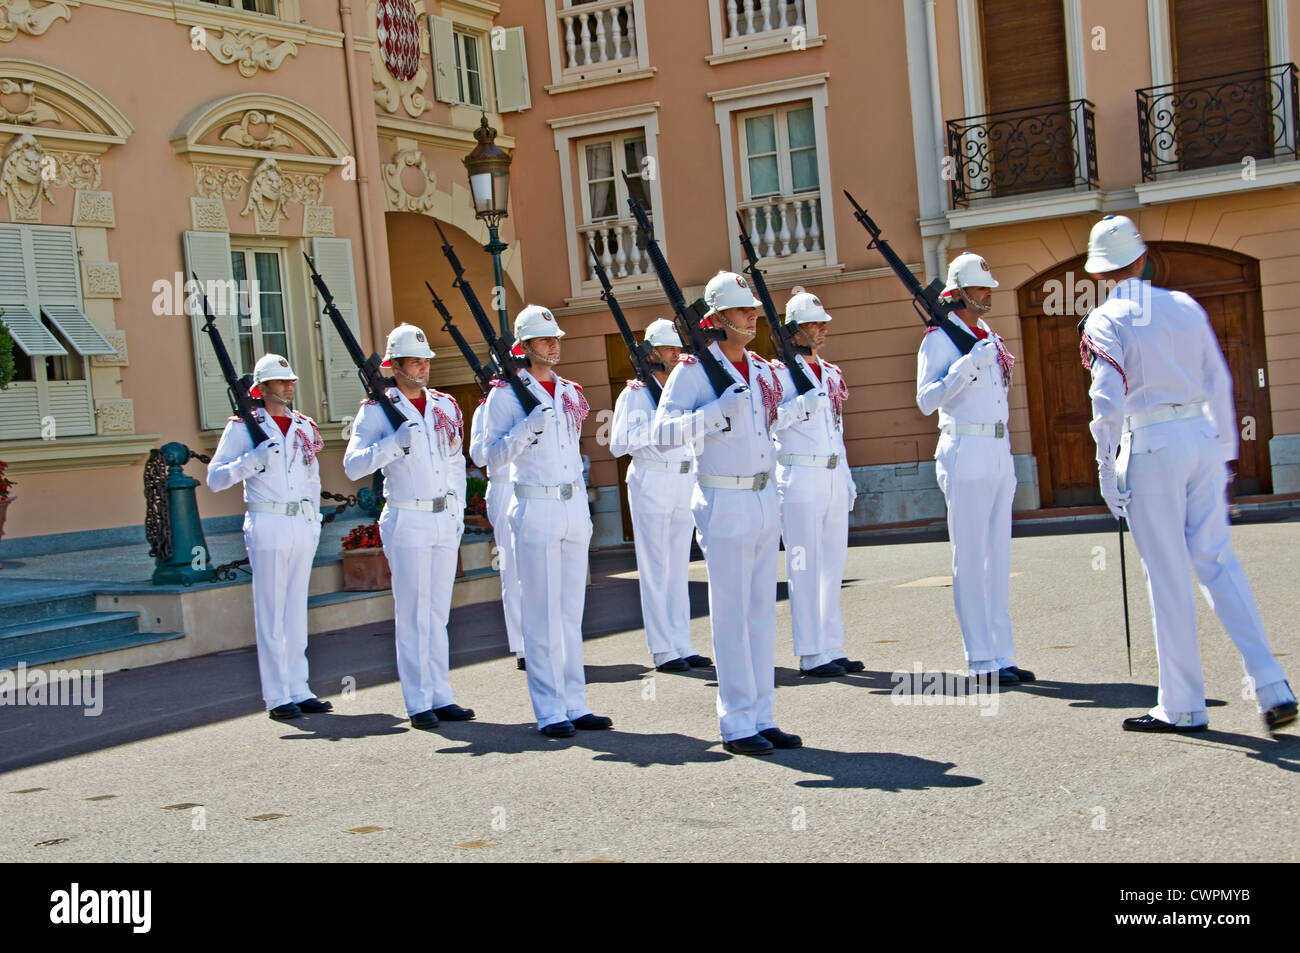 Changing of the guards ceremony in front of the Prince's palace in Monaco Stock Photo